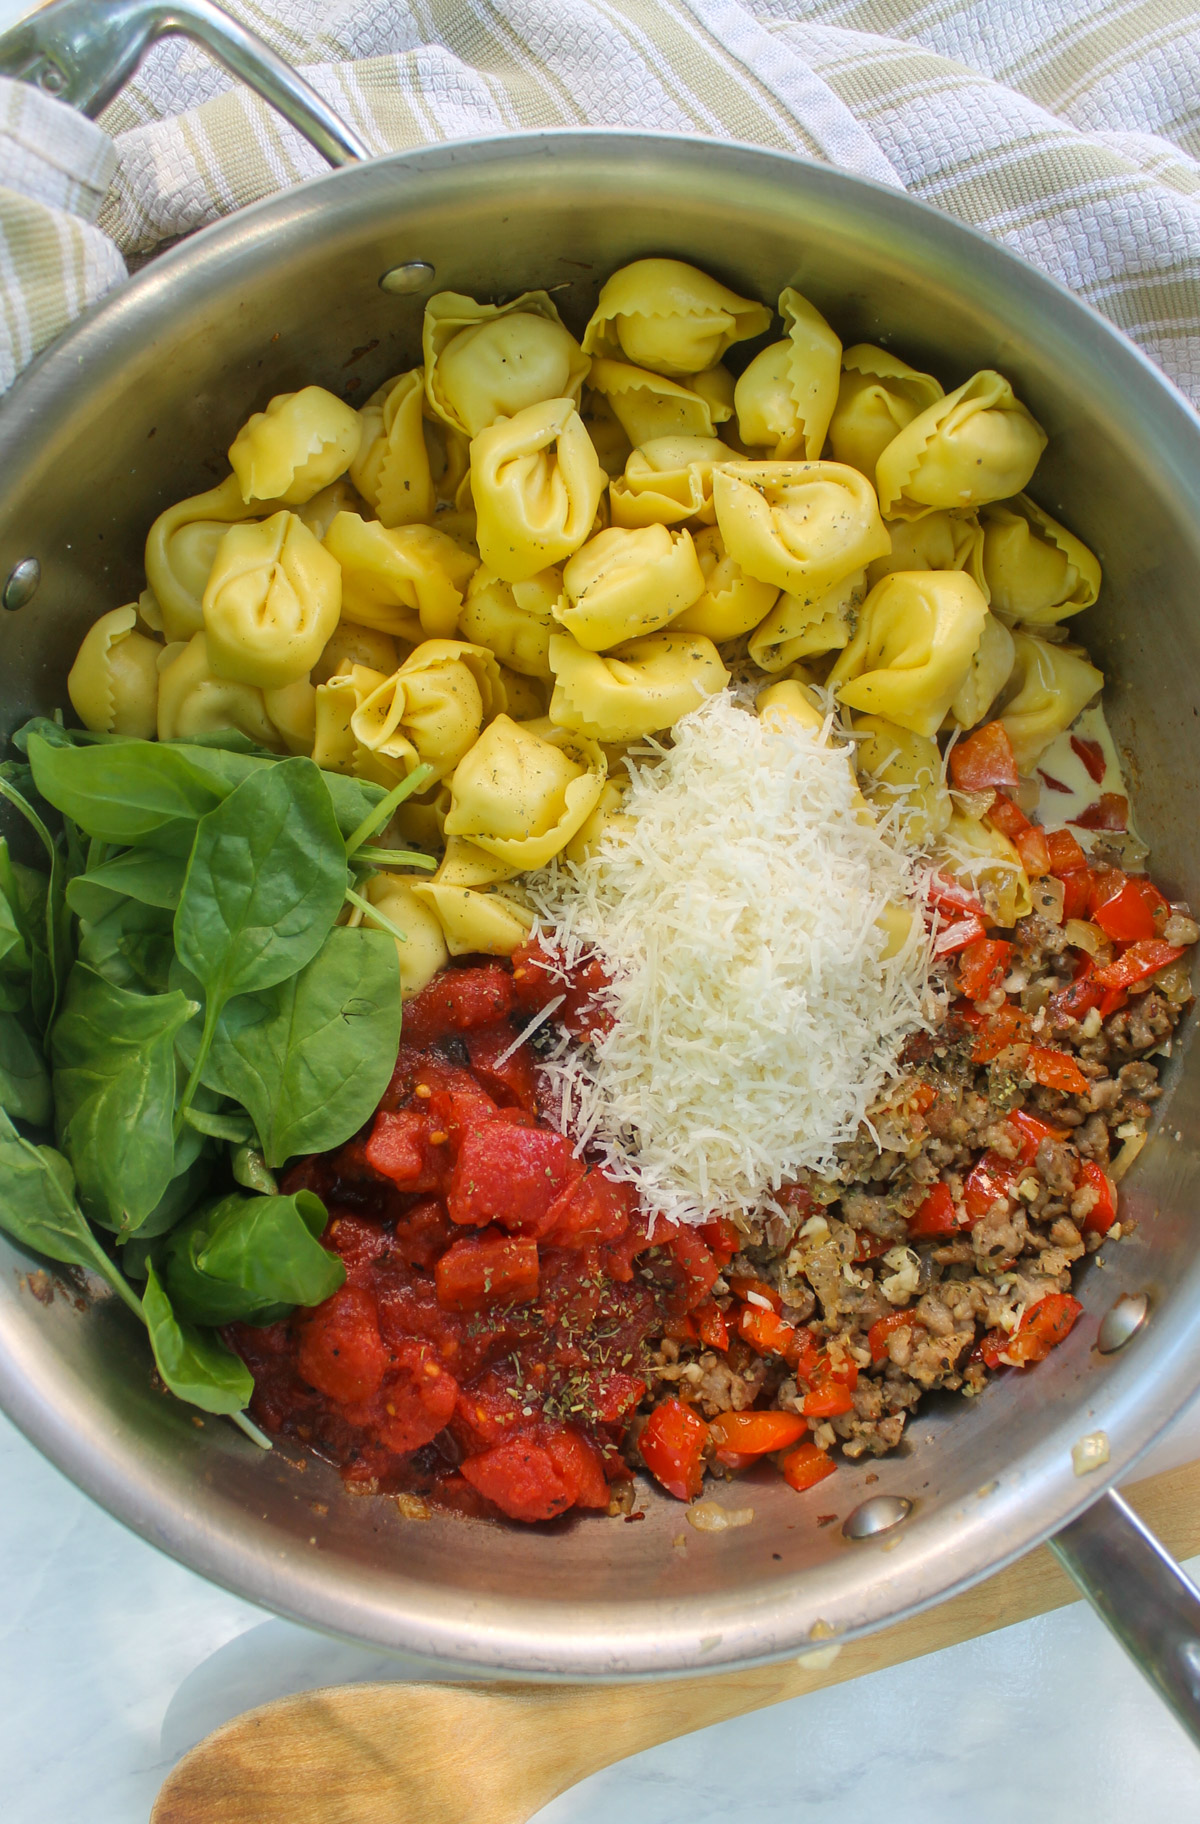 Adding tortellini, crushed tomato, spinach, cream and Parmesan cheese to the skillet with the sausage and veggies.